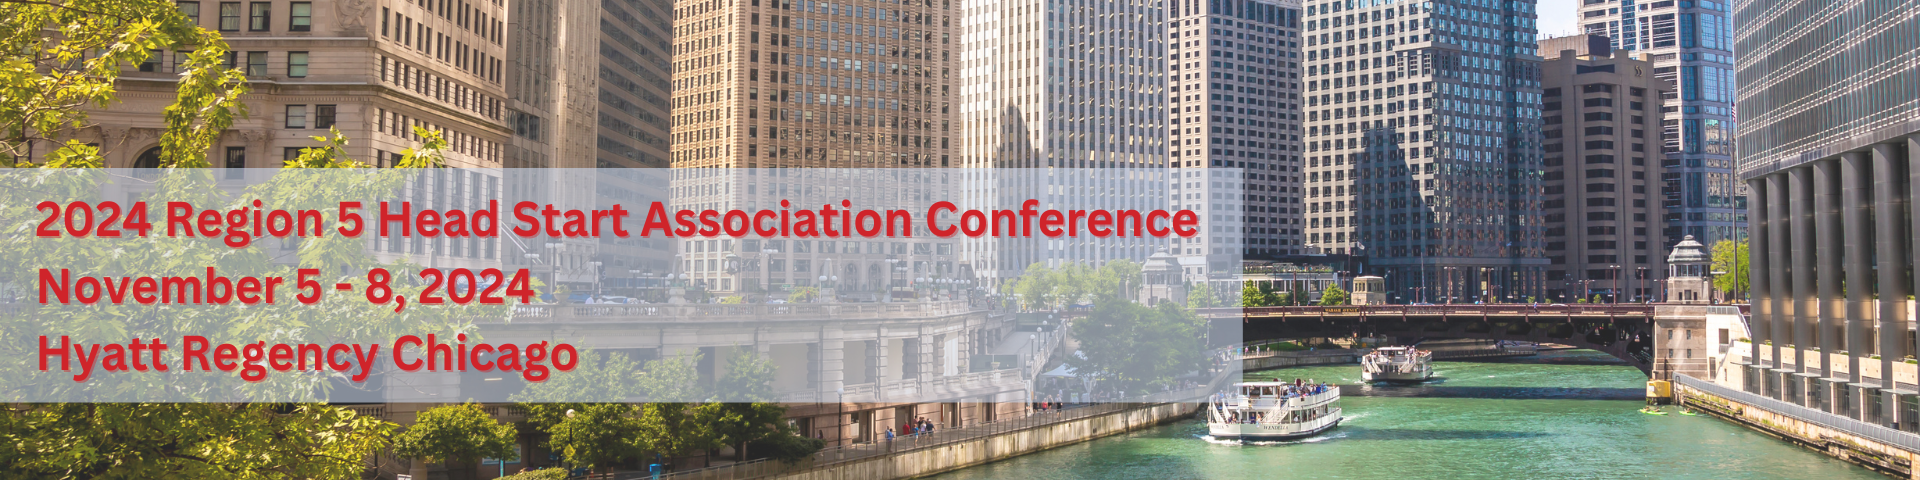 a scenic image of the chicago river with buildings in the background overlayed with the words region 5 head start association conference, november 6-8 2024 and hotel regency chicago 